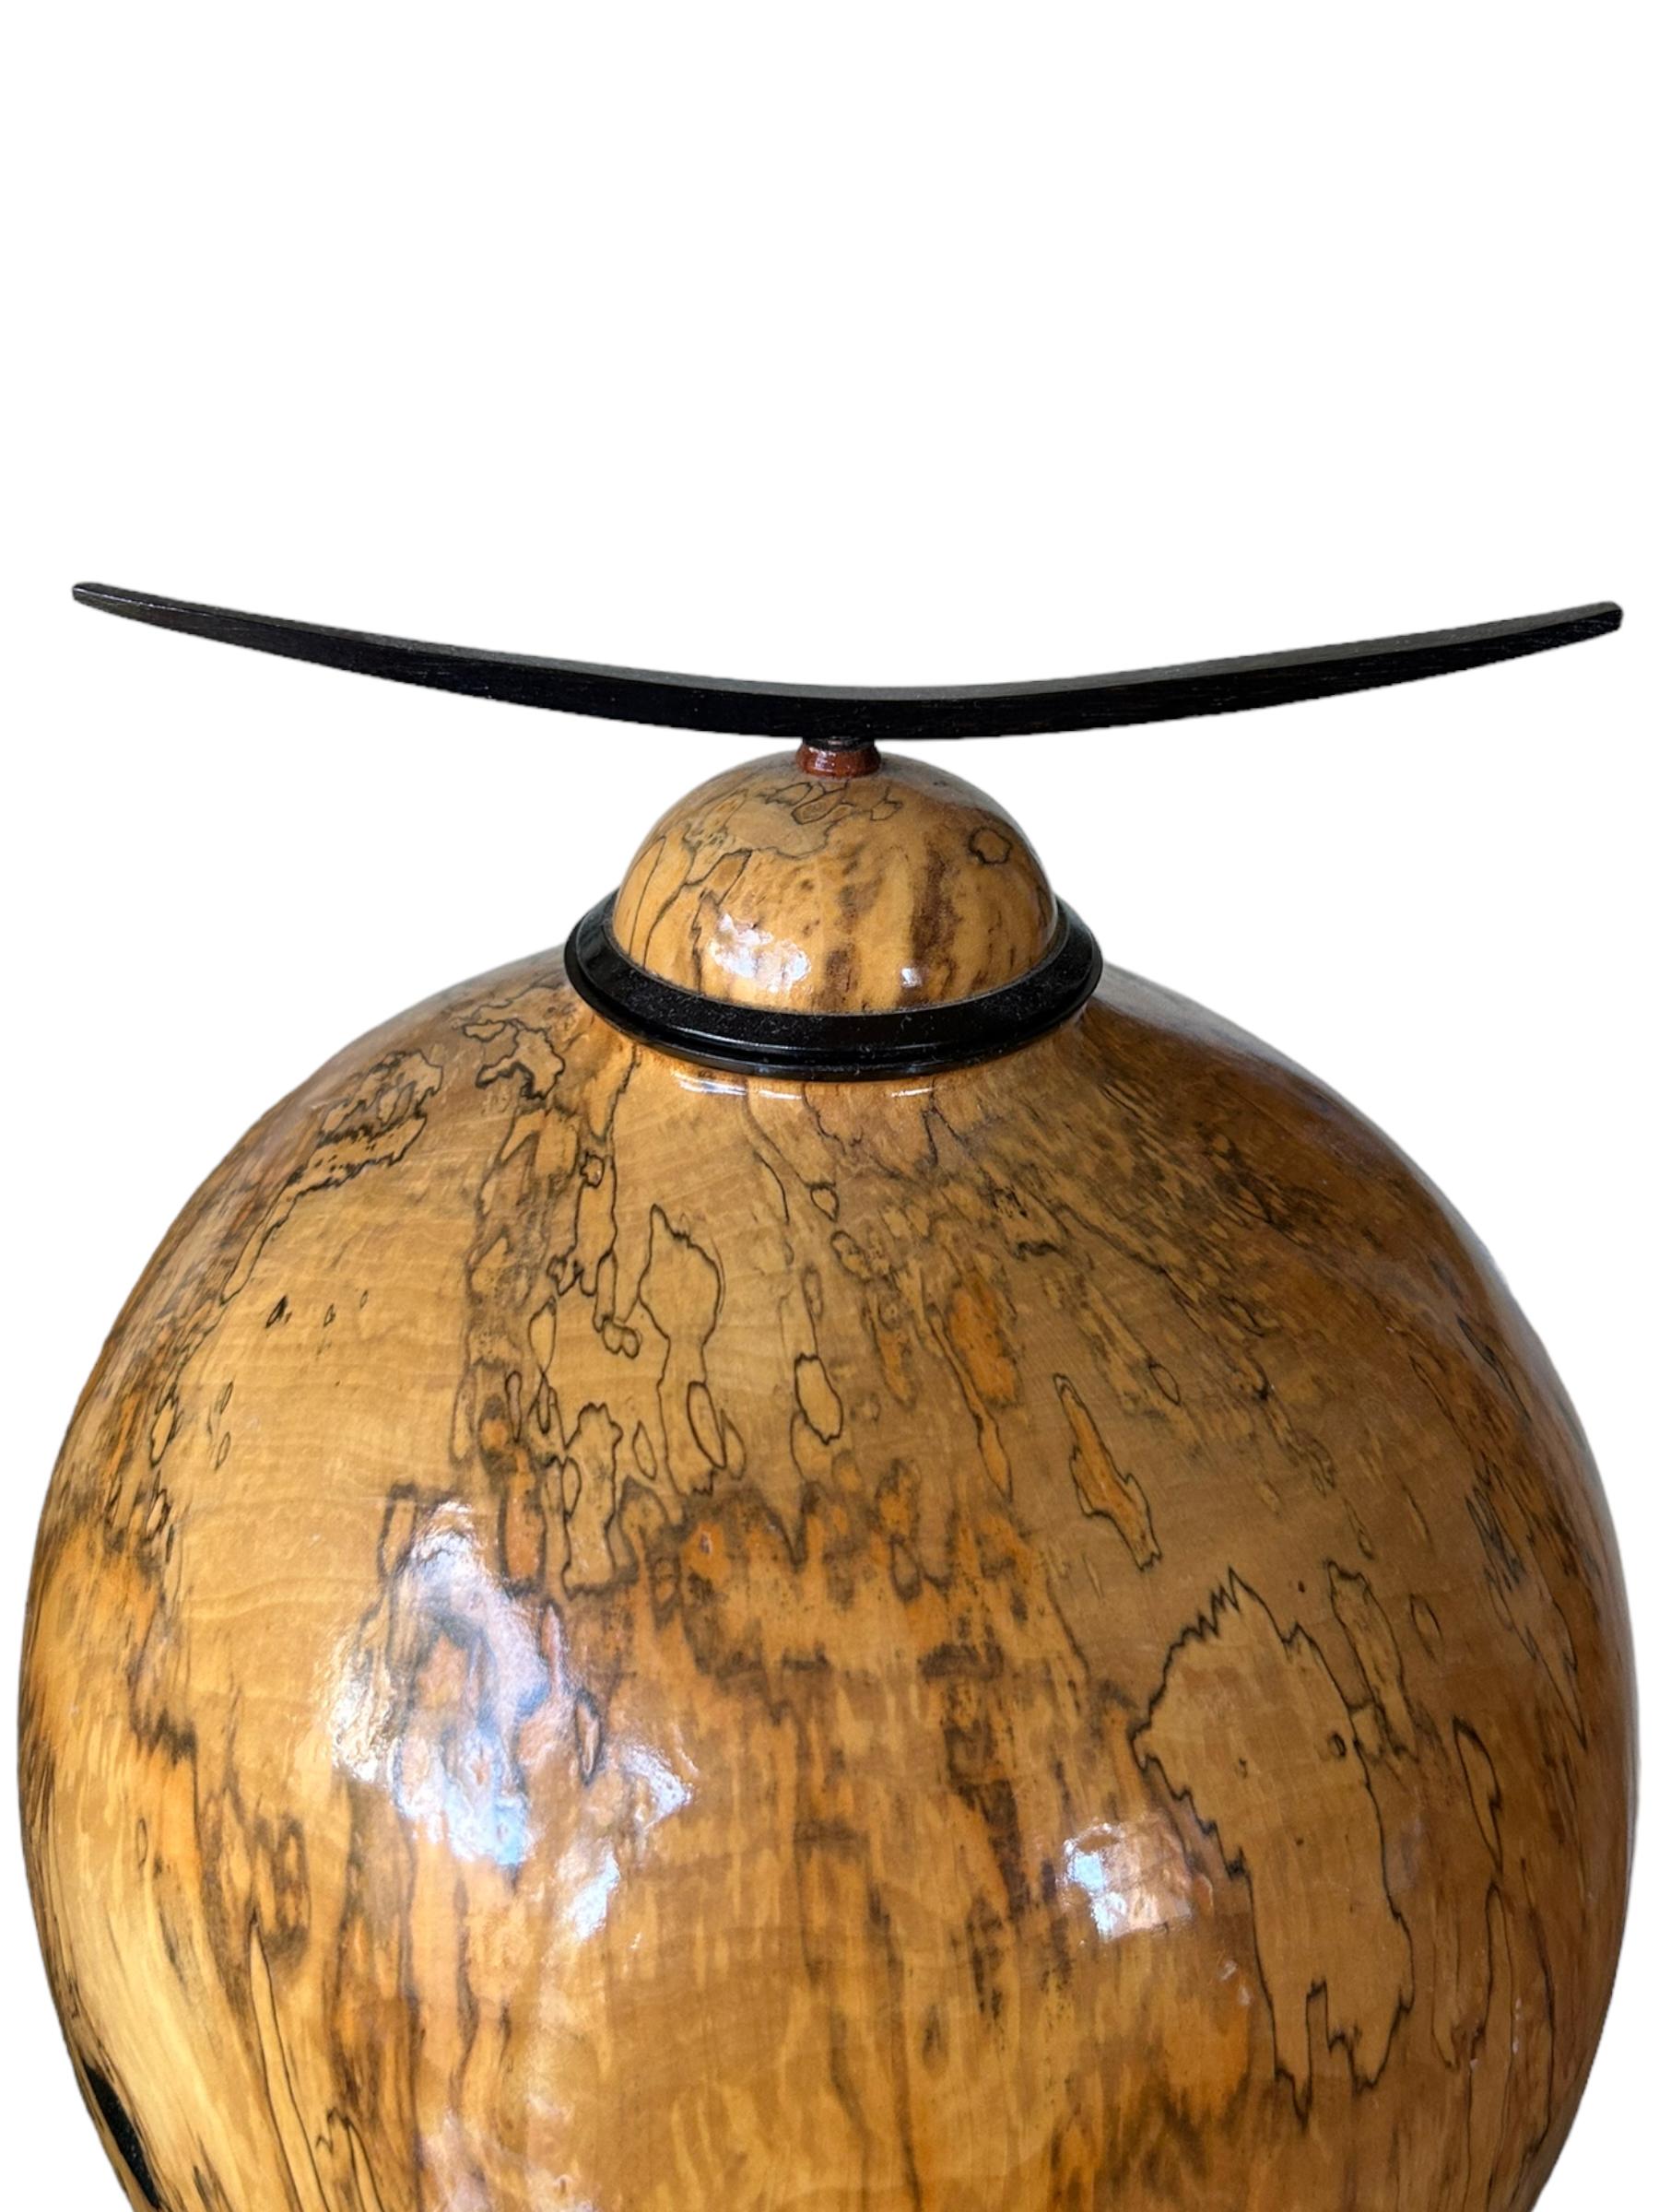 This vintage sculpture vessel by John Mascoll is a unique piece of art that will stand out in any collection. Crafted from red maple wood, this sculpture showcases the artist’s talent and creativity.  John studied engineering in the US and designed